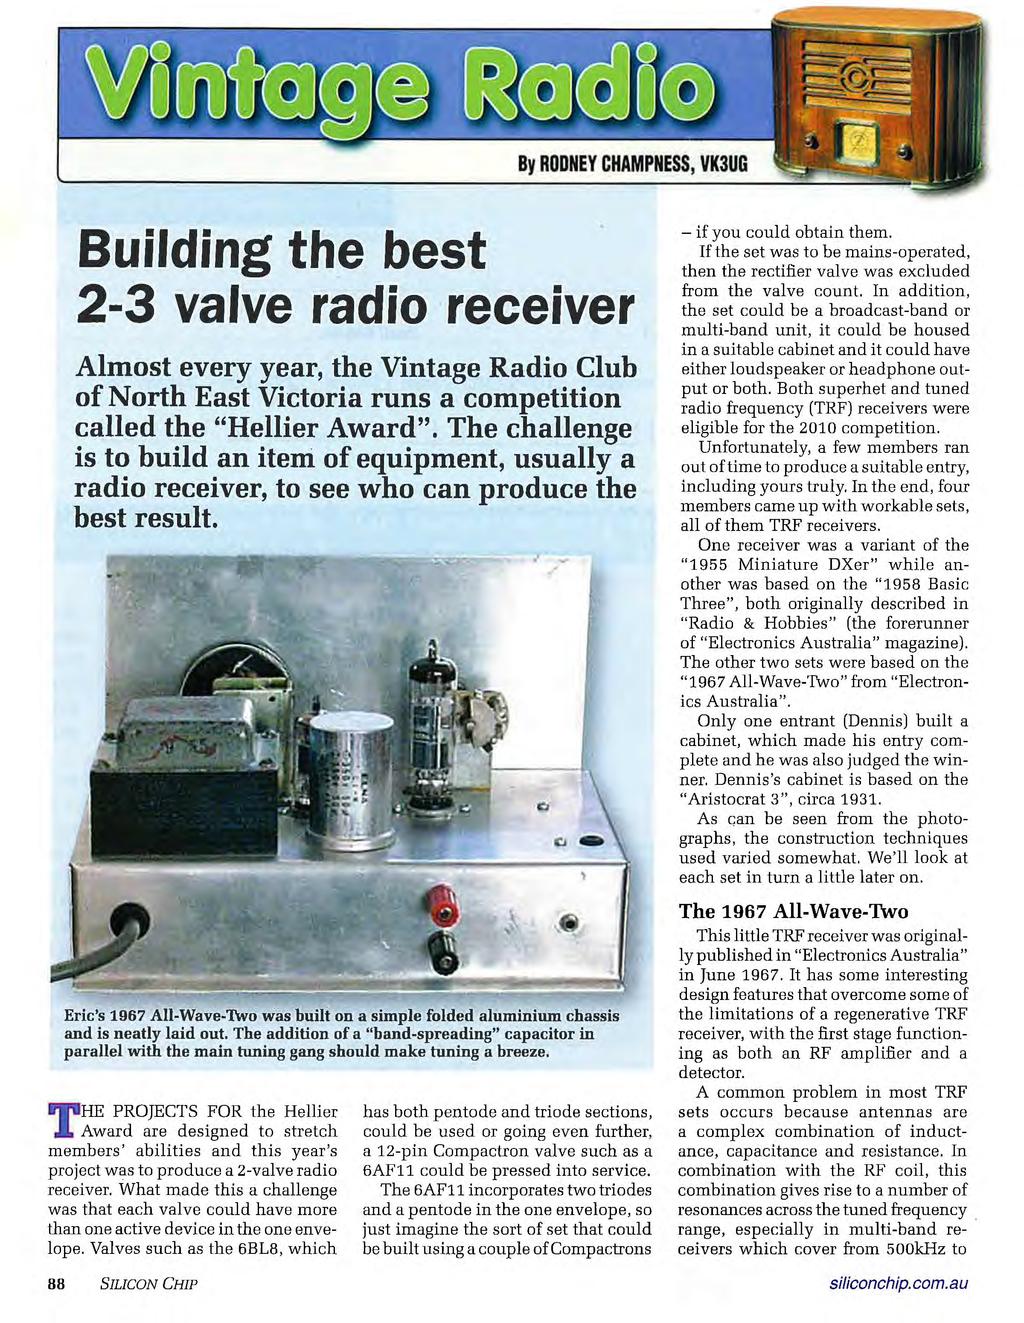 By RODNEY CHAMPNESS, MUG Building the best 2-3 valve radio receiver Almost every year, the Vintage Radio Club of North East Victoria runs a competition called the "Hellier Award".